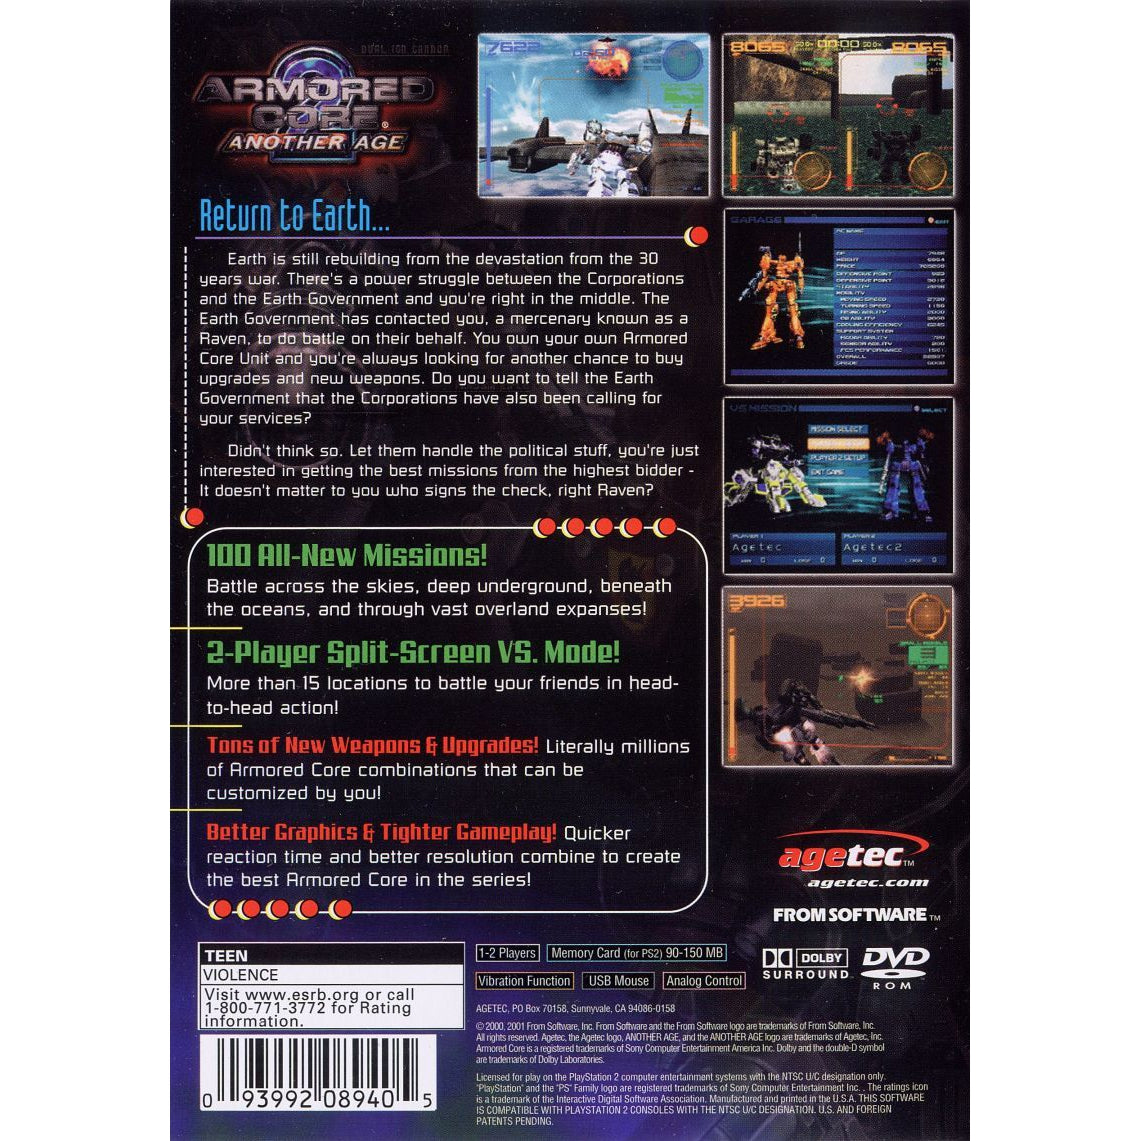 Armored Core 2: Another Age -  PlayStation 2 (PS2) Game Complete - YourGamingShop.com - Buy, Sell, Trade Video Games Online. 120 Day Warranty. Satisfaction Guaranteed.